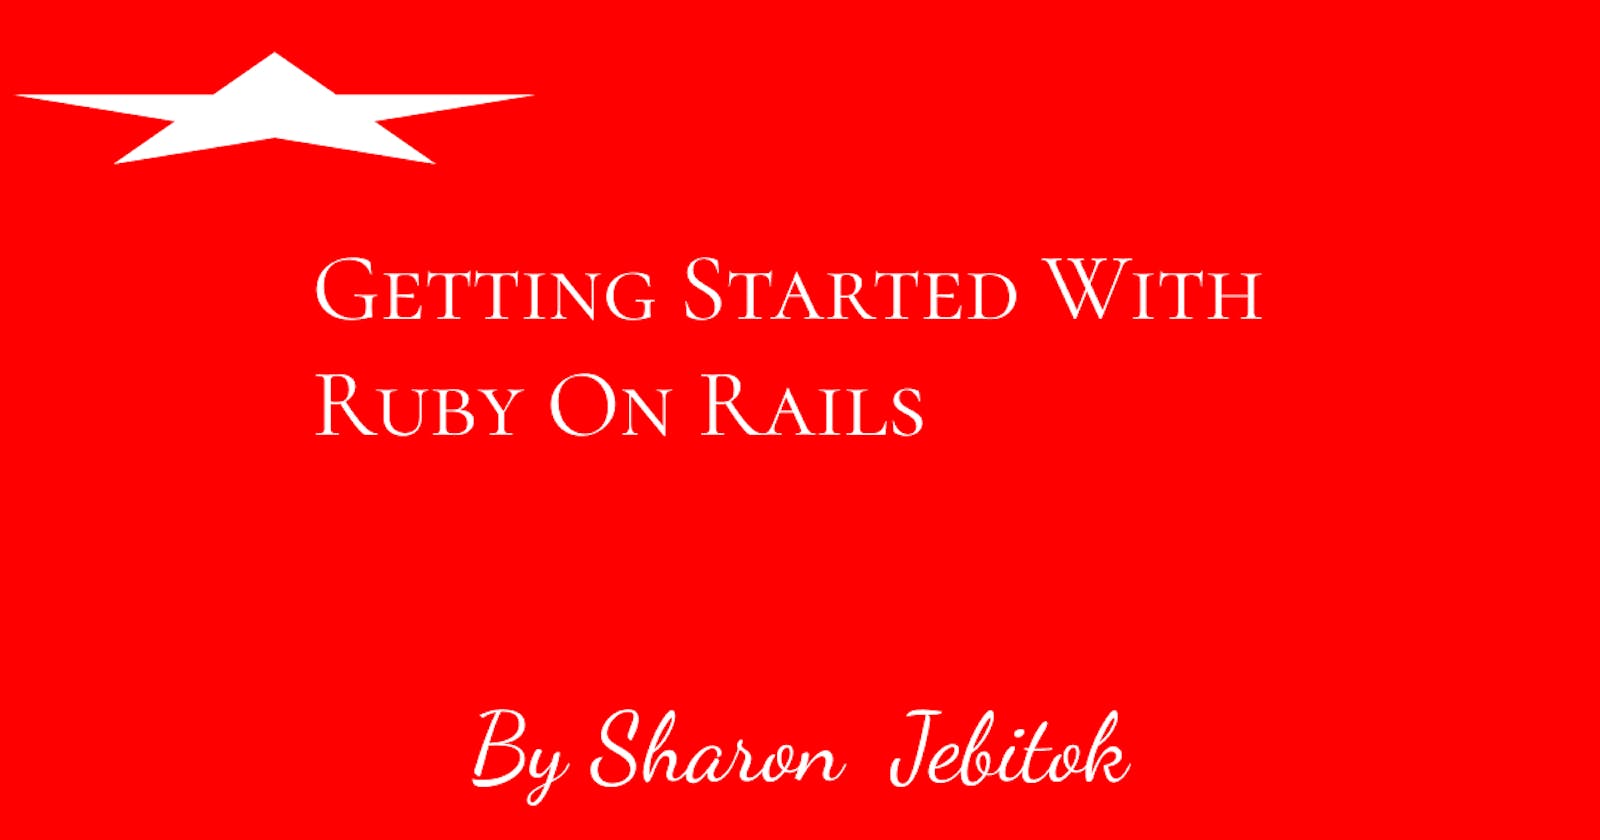 Getting started with Ruby on Rails